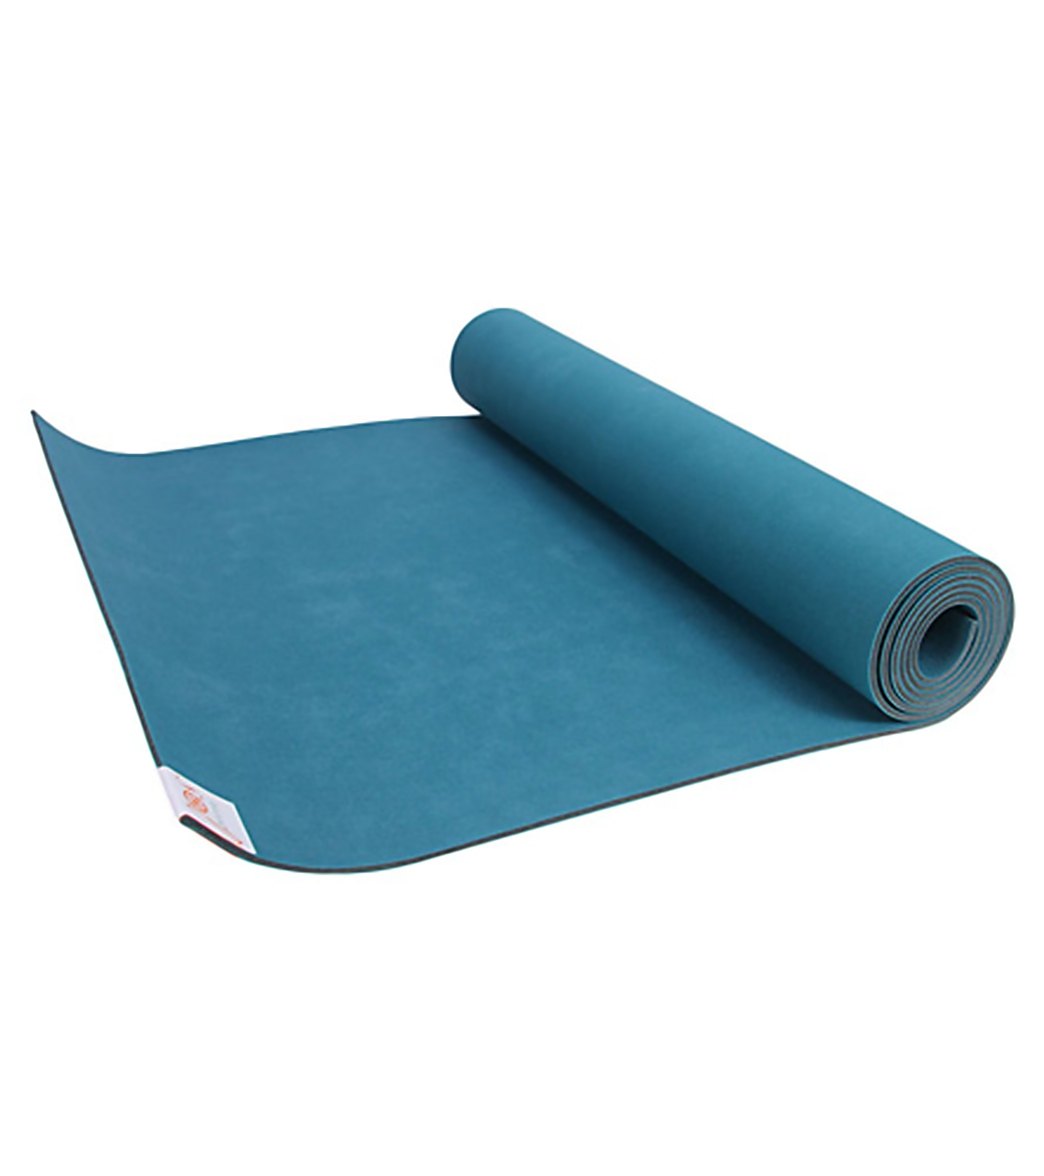 YOG SHAKTI - Yoga Mat for Gym Workout, Yoga Exercise with 4mm Thickness, Exercise mat for Home Workout